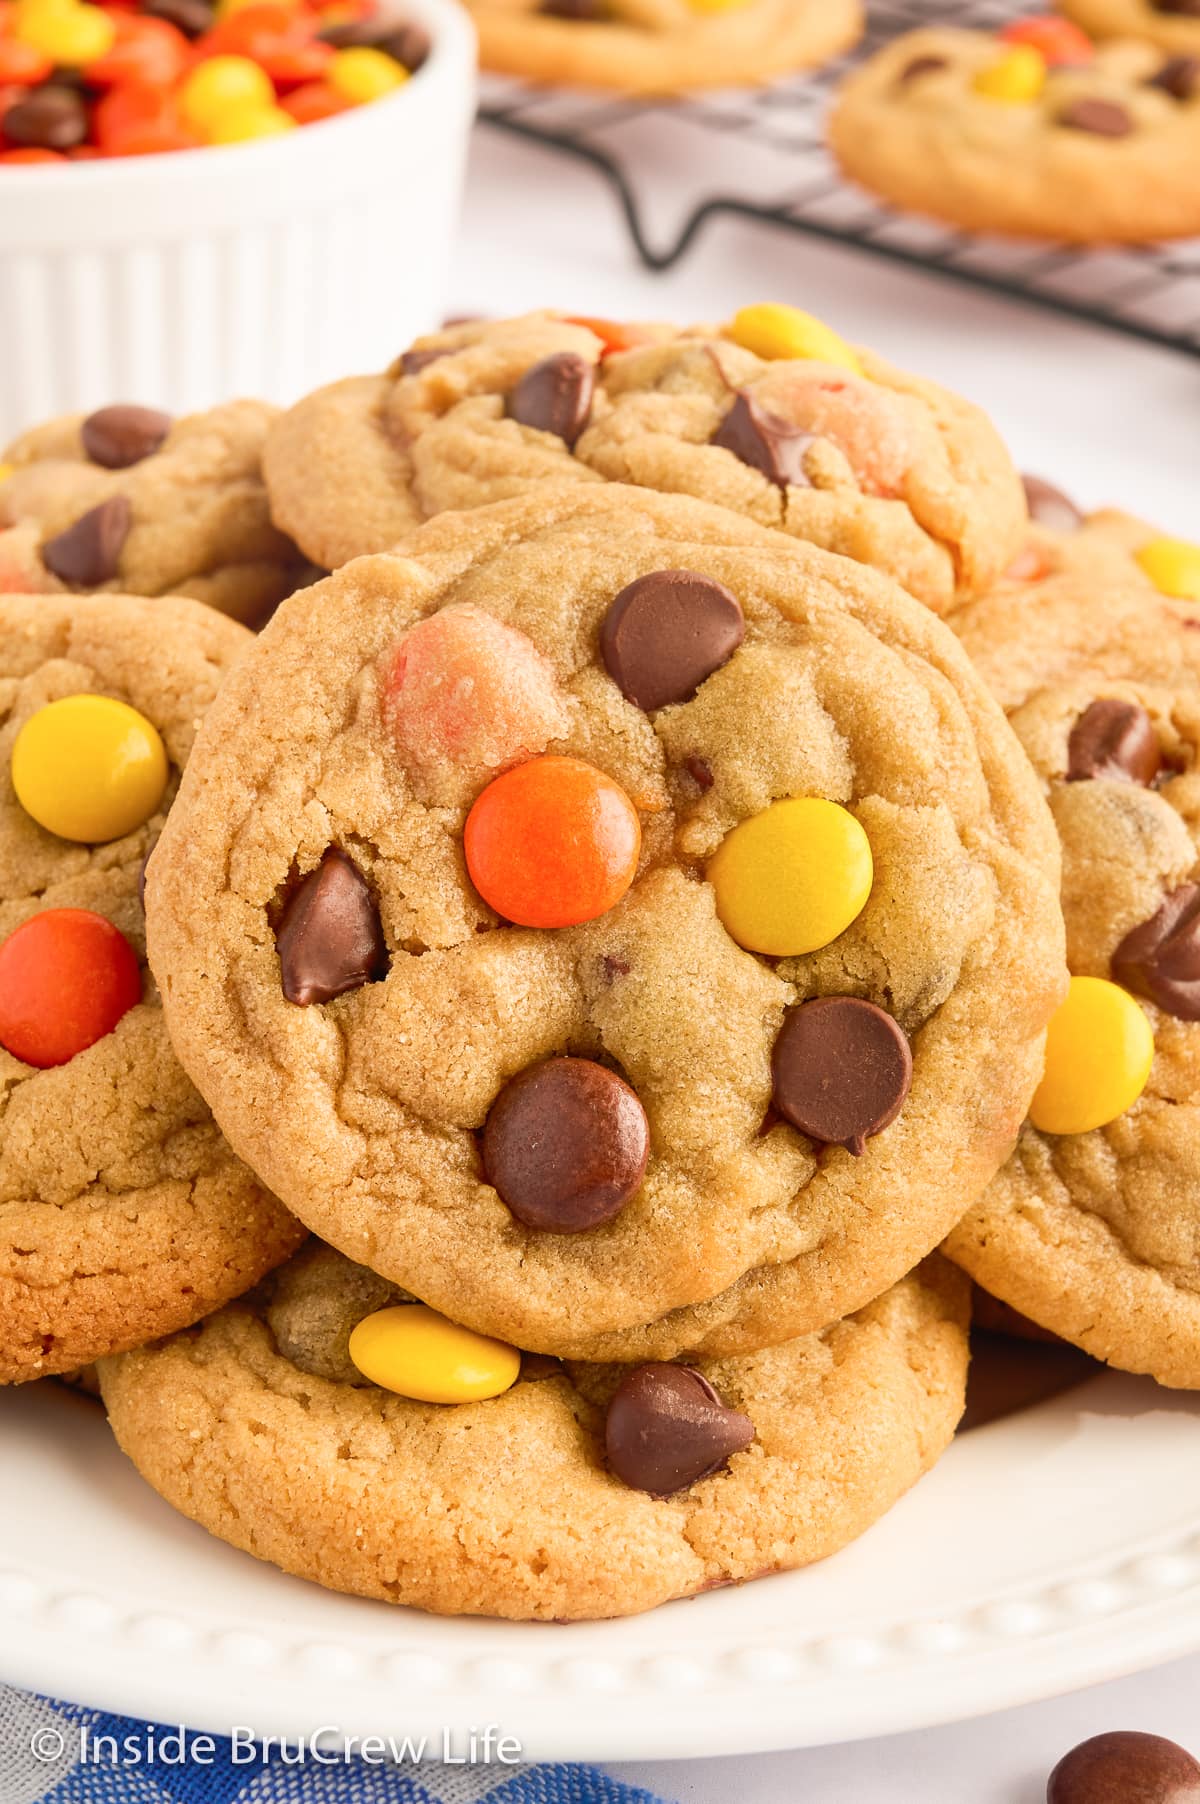 A very close up of a peanut butter cookie with Reese's Pieces.